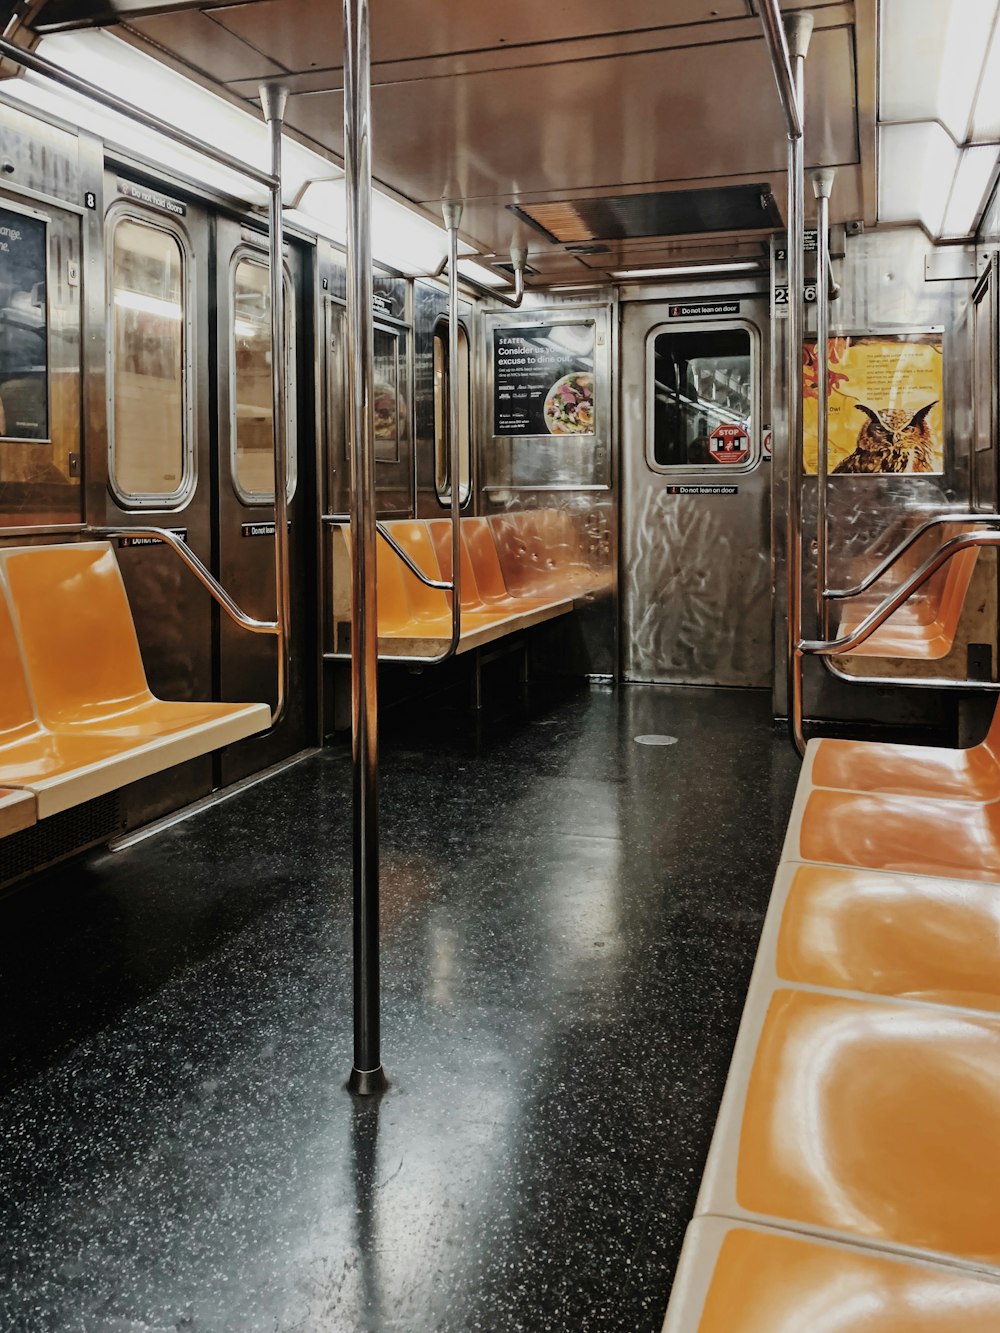 a subway car with orange seats and metal railings